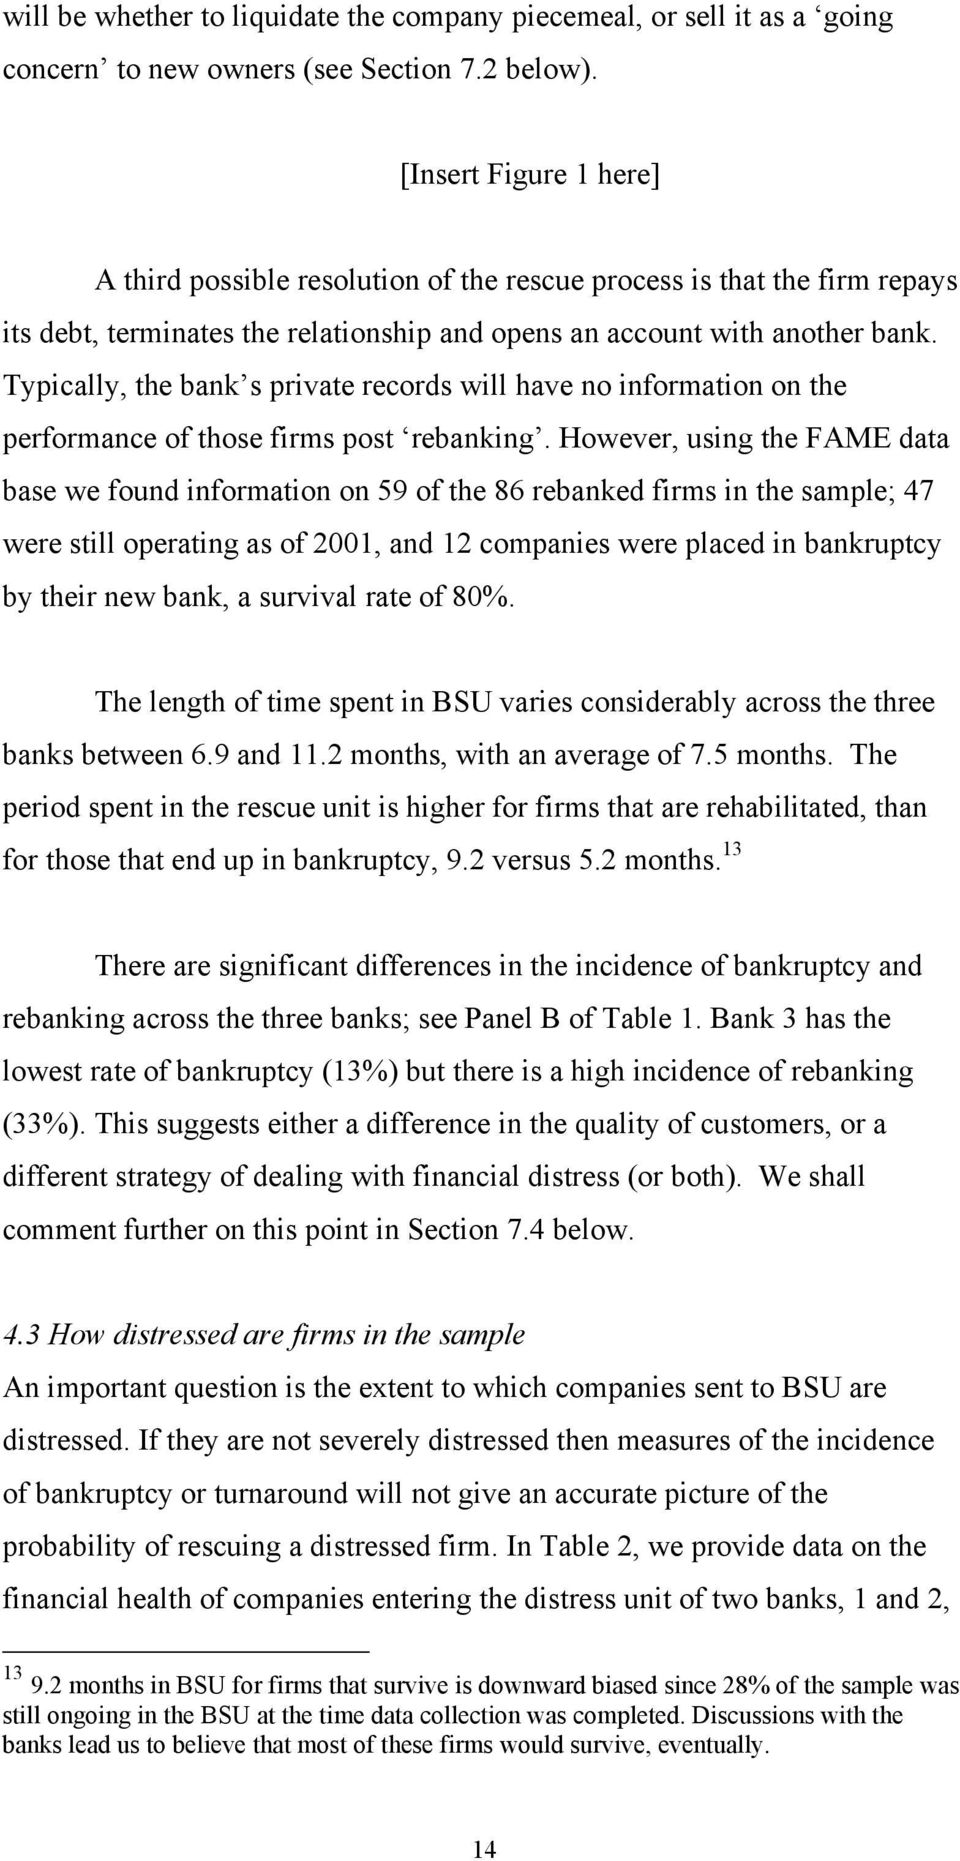 Typically, the bank s private records will have no information on the performance of those firms post rebanking.